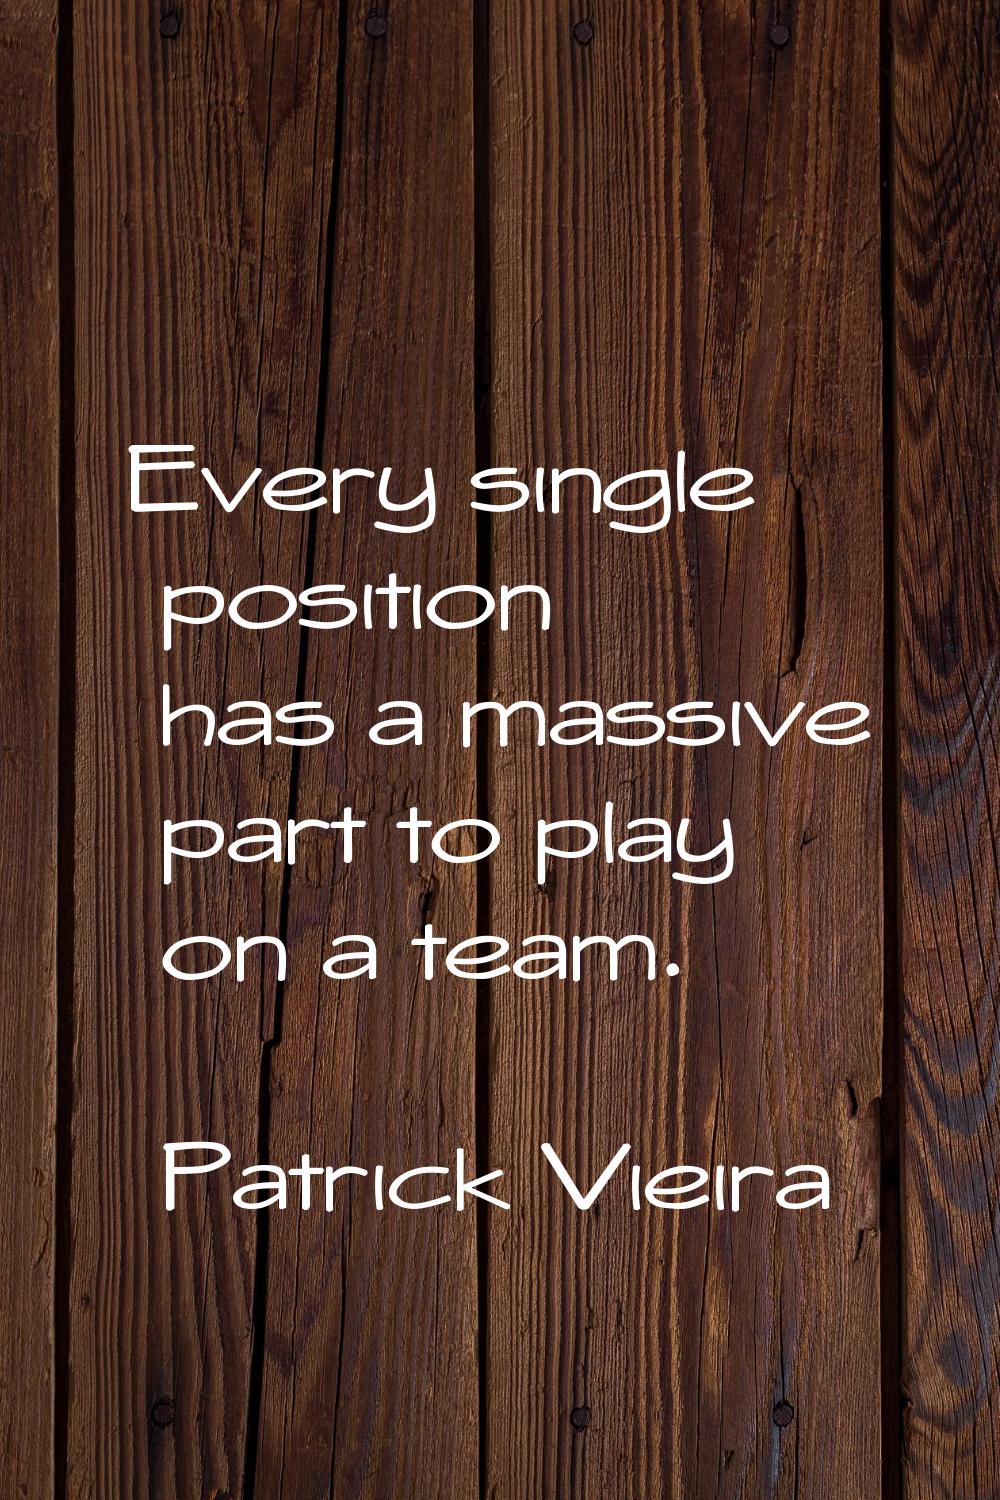 Every single position has a massive part to play on a team.